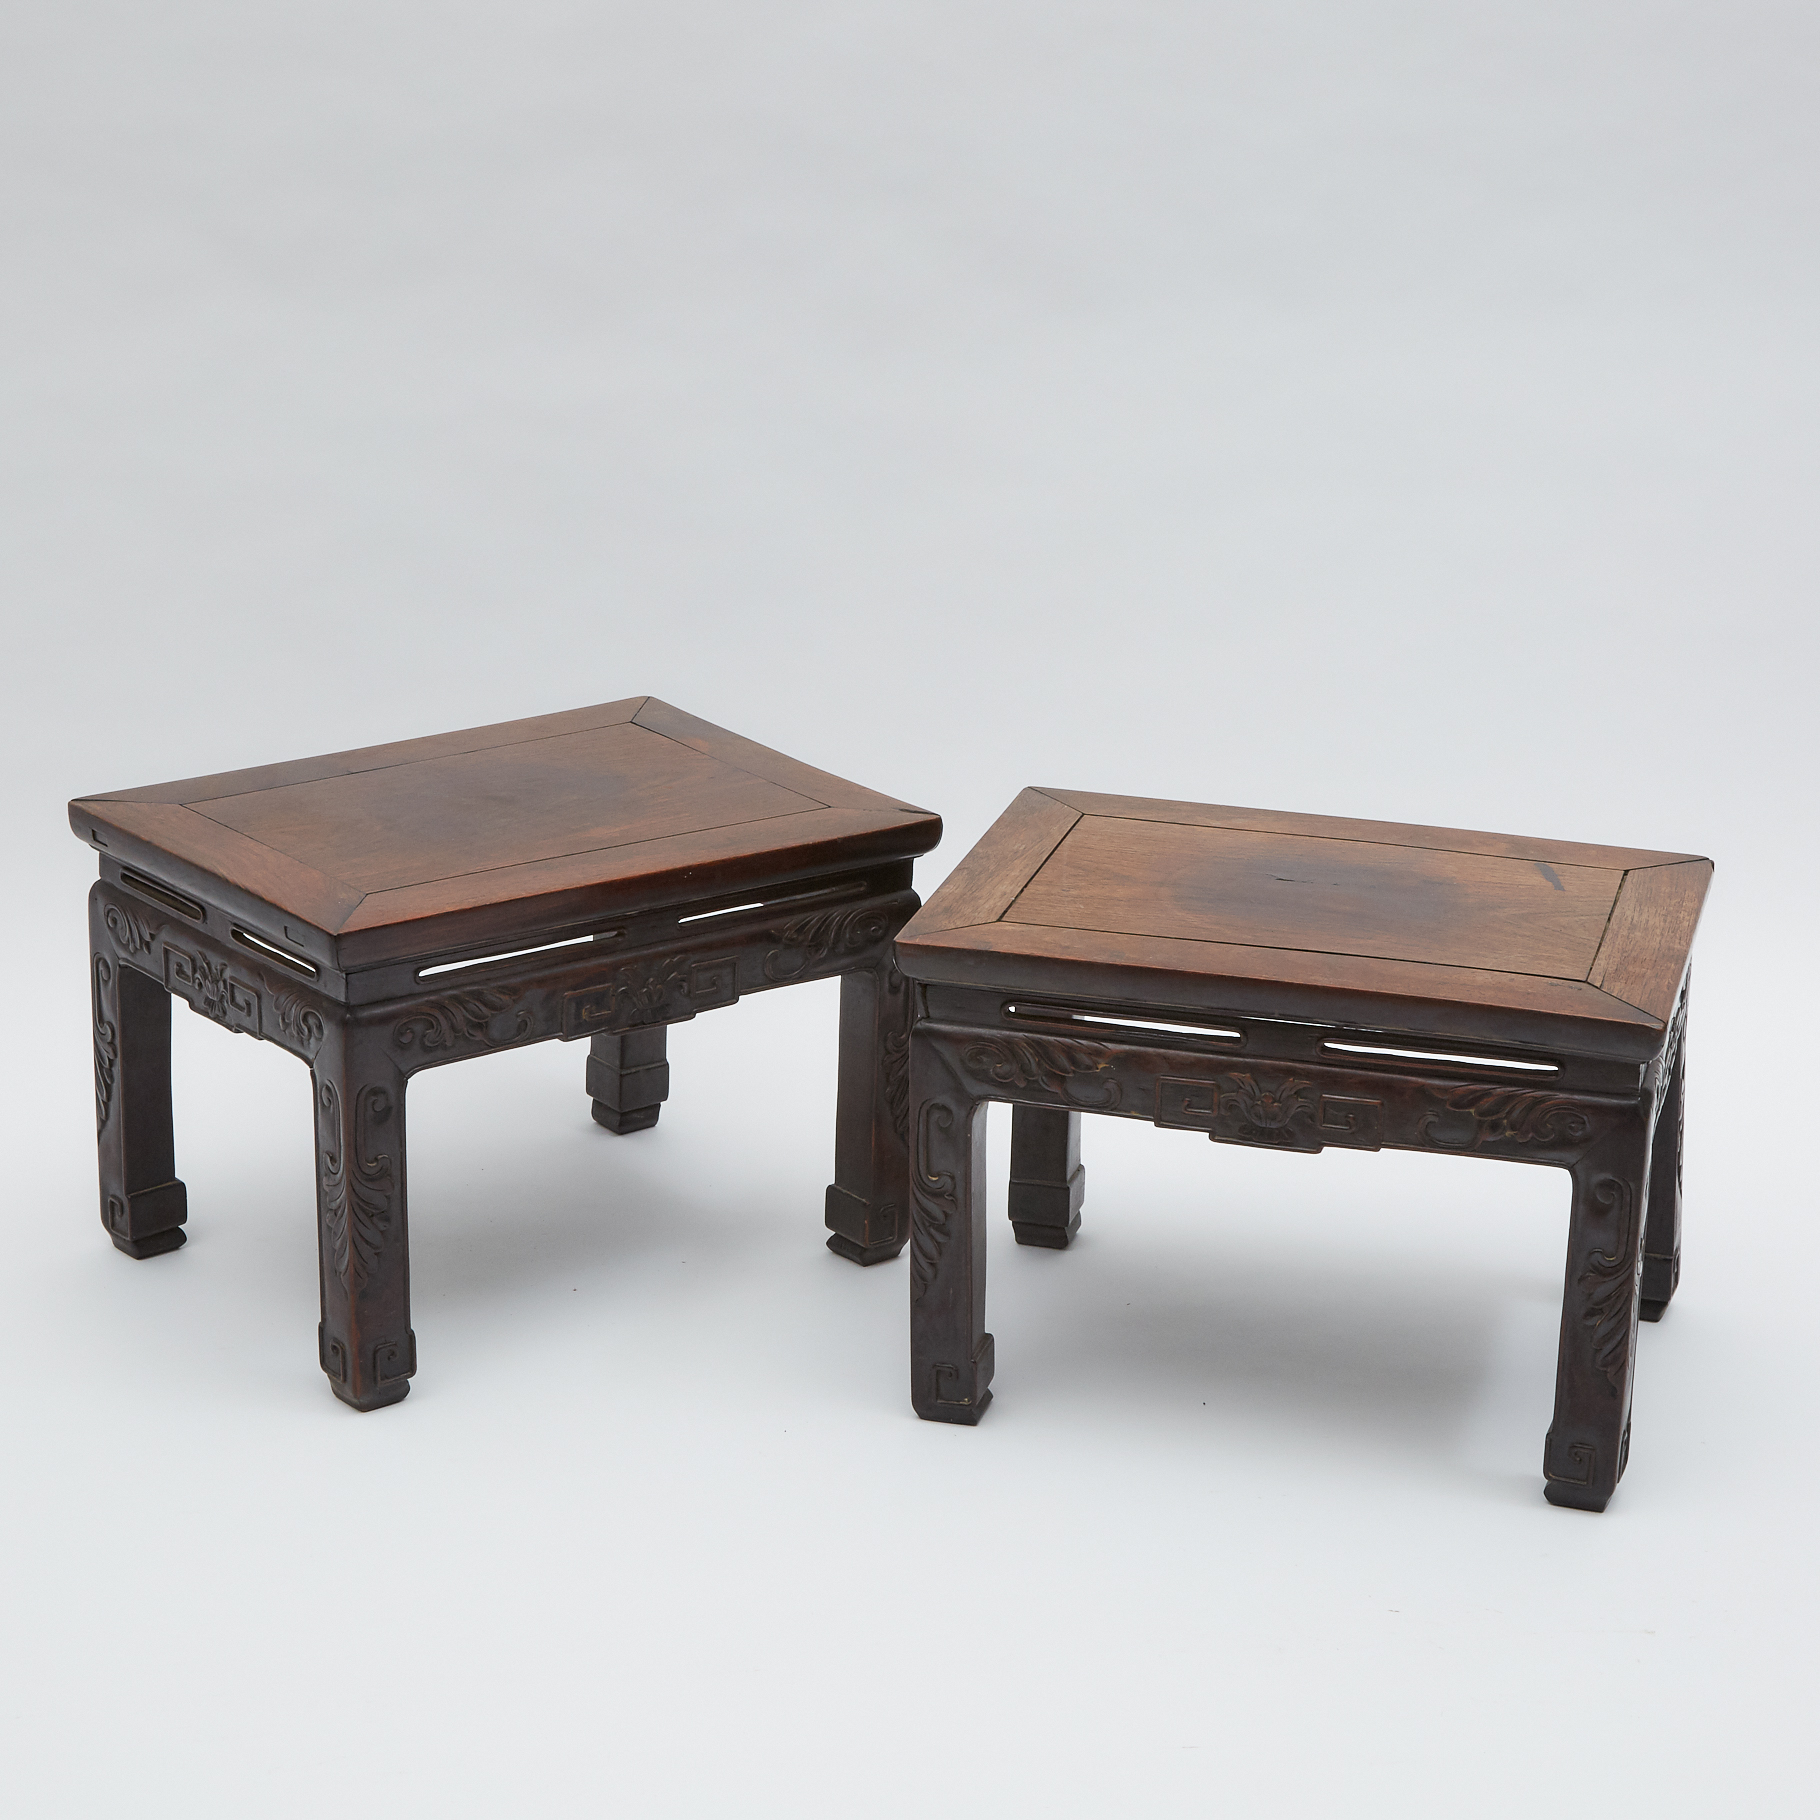 A Pair of Chinese Hardwood Carved Stools